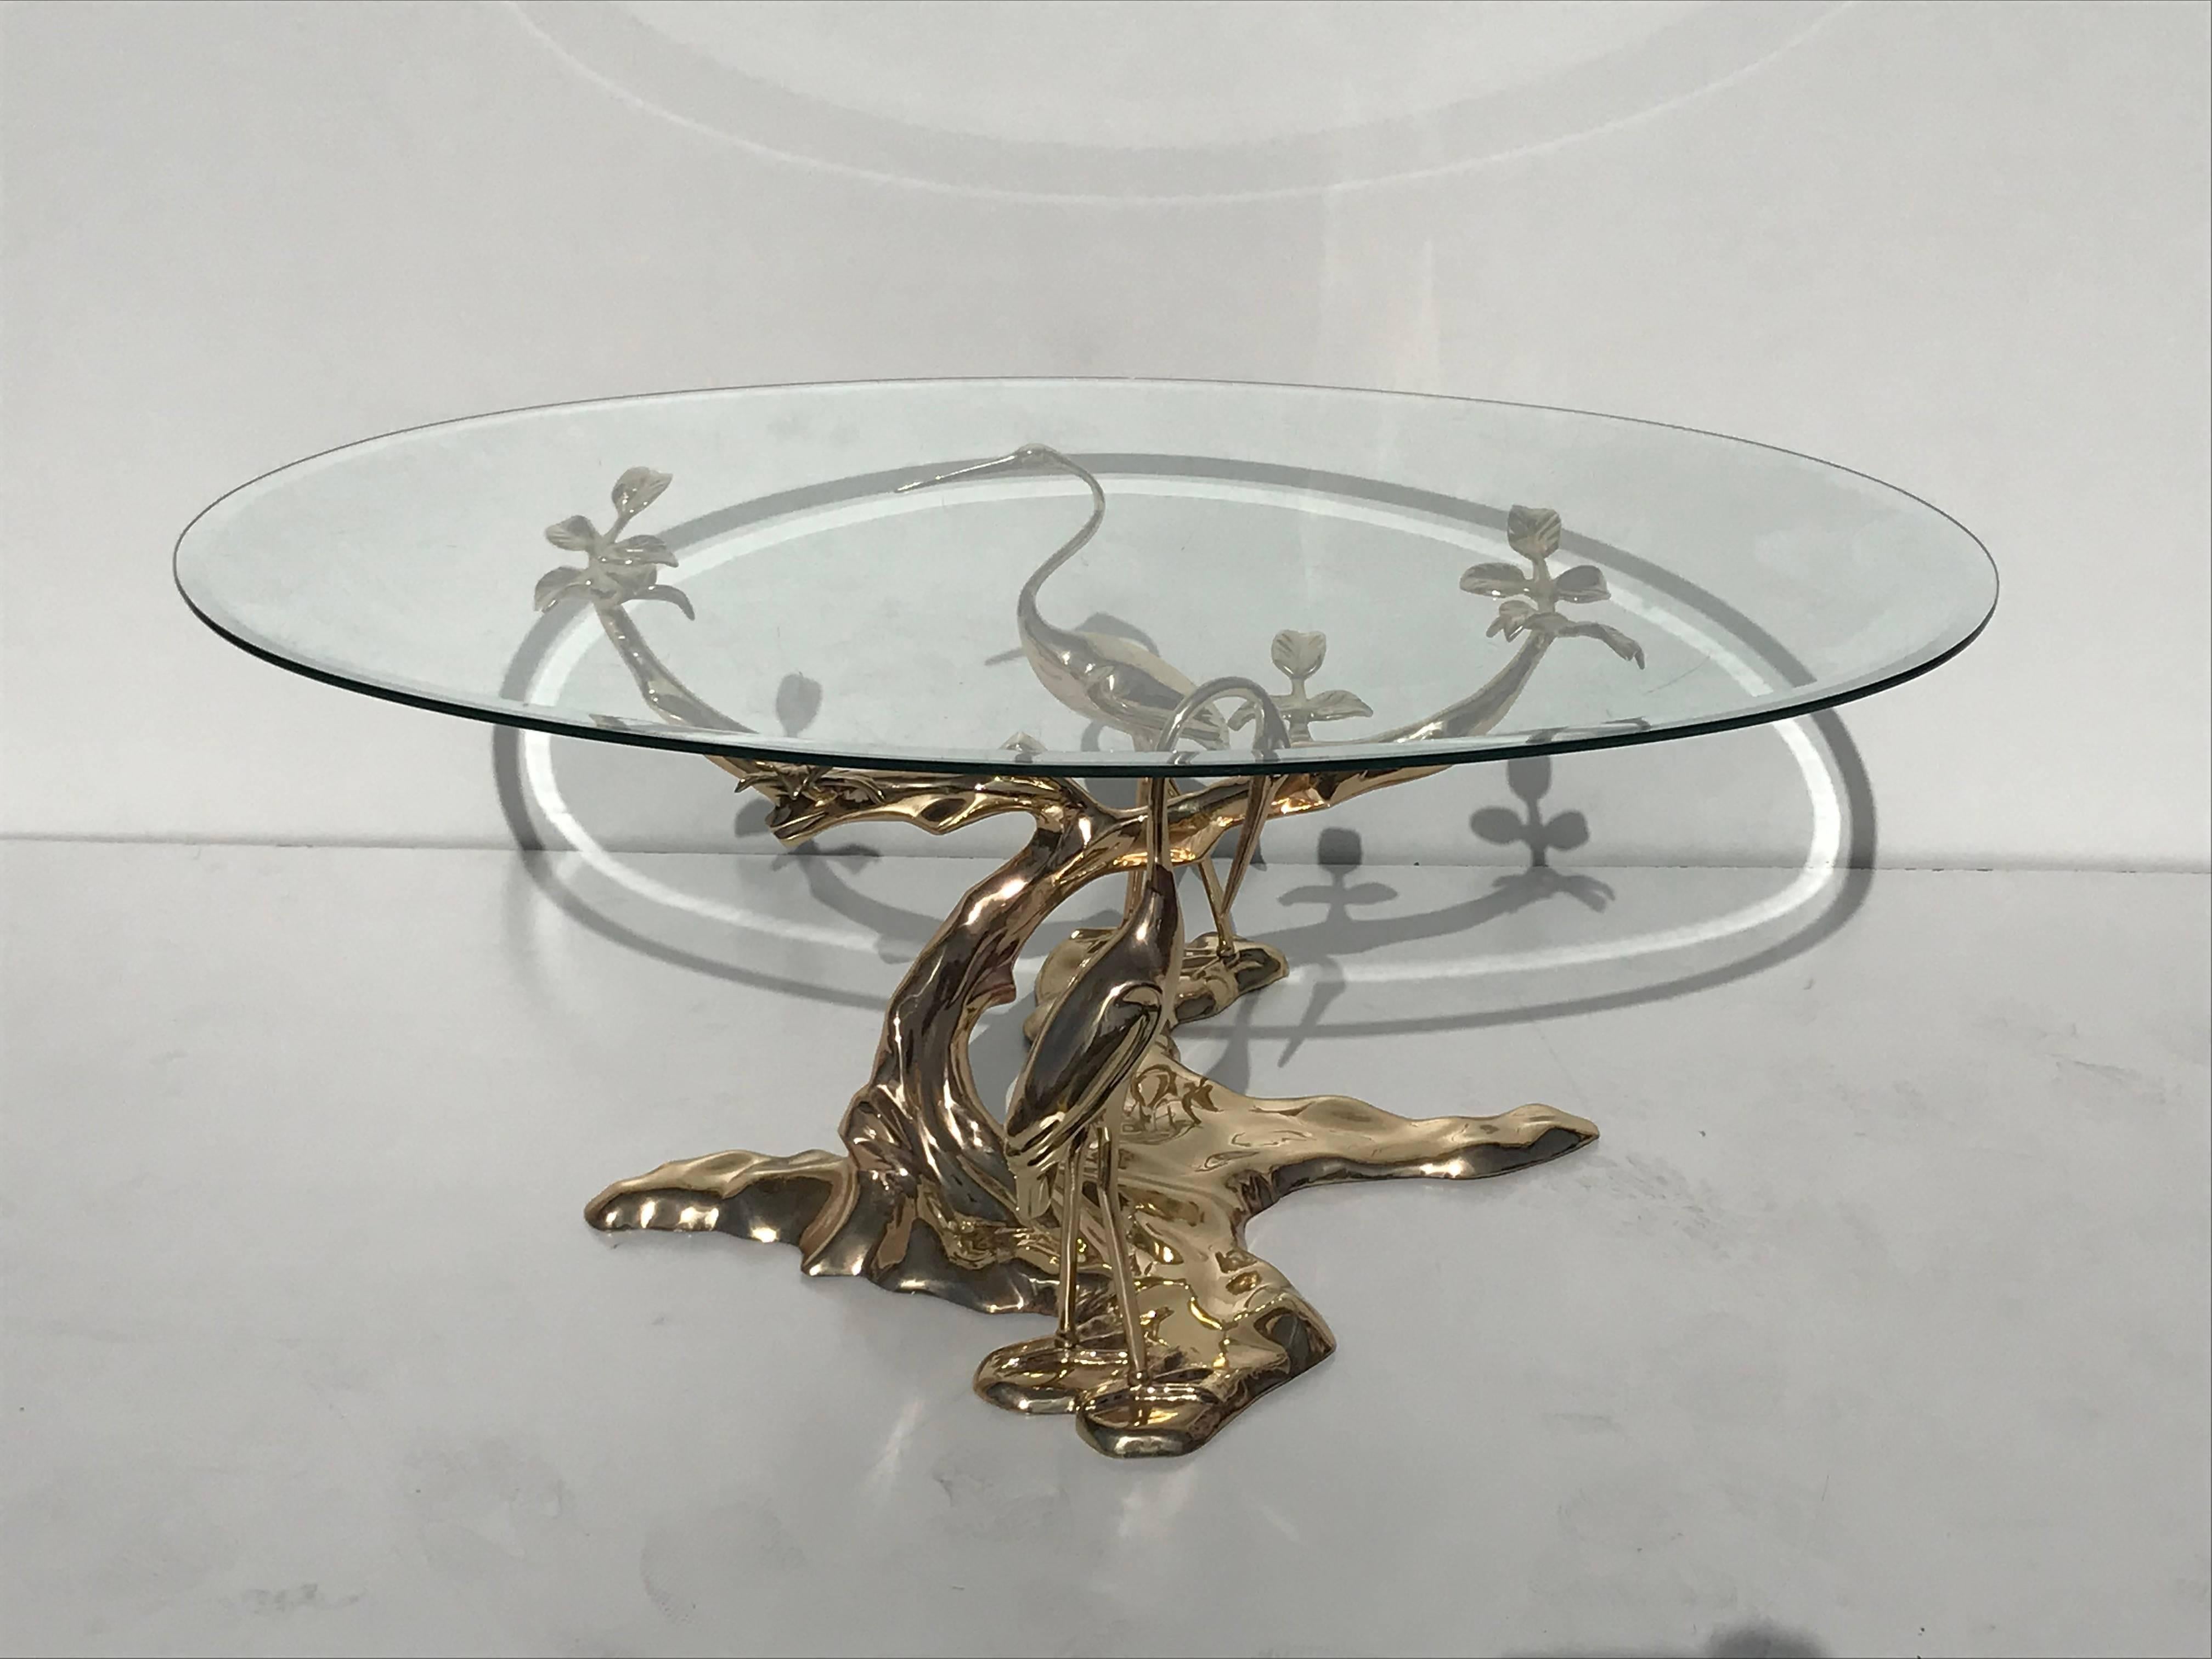 Brass Bonsai tree coffee table with oval glass top. Base measures 27 inches by 27 inches and 16 inches high.